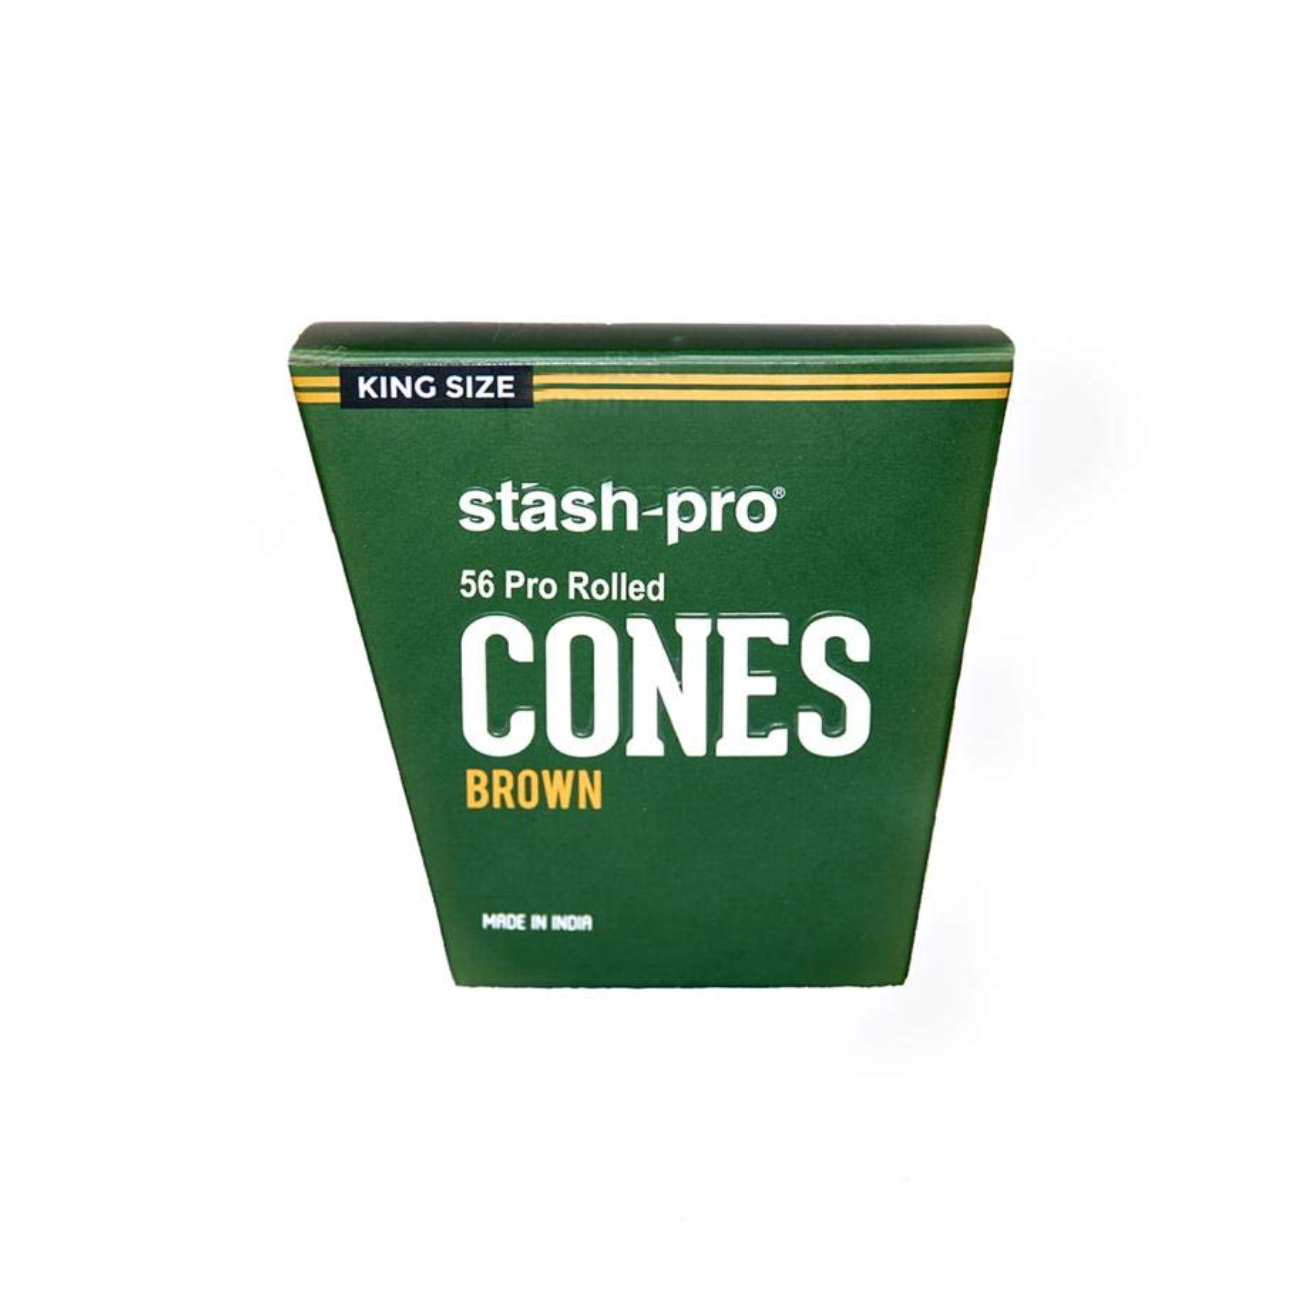 STASH-PRO Stash Pro Unbleached 56 Pro-Rolled King Cones Brown - Storm Chaser